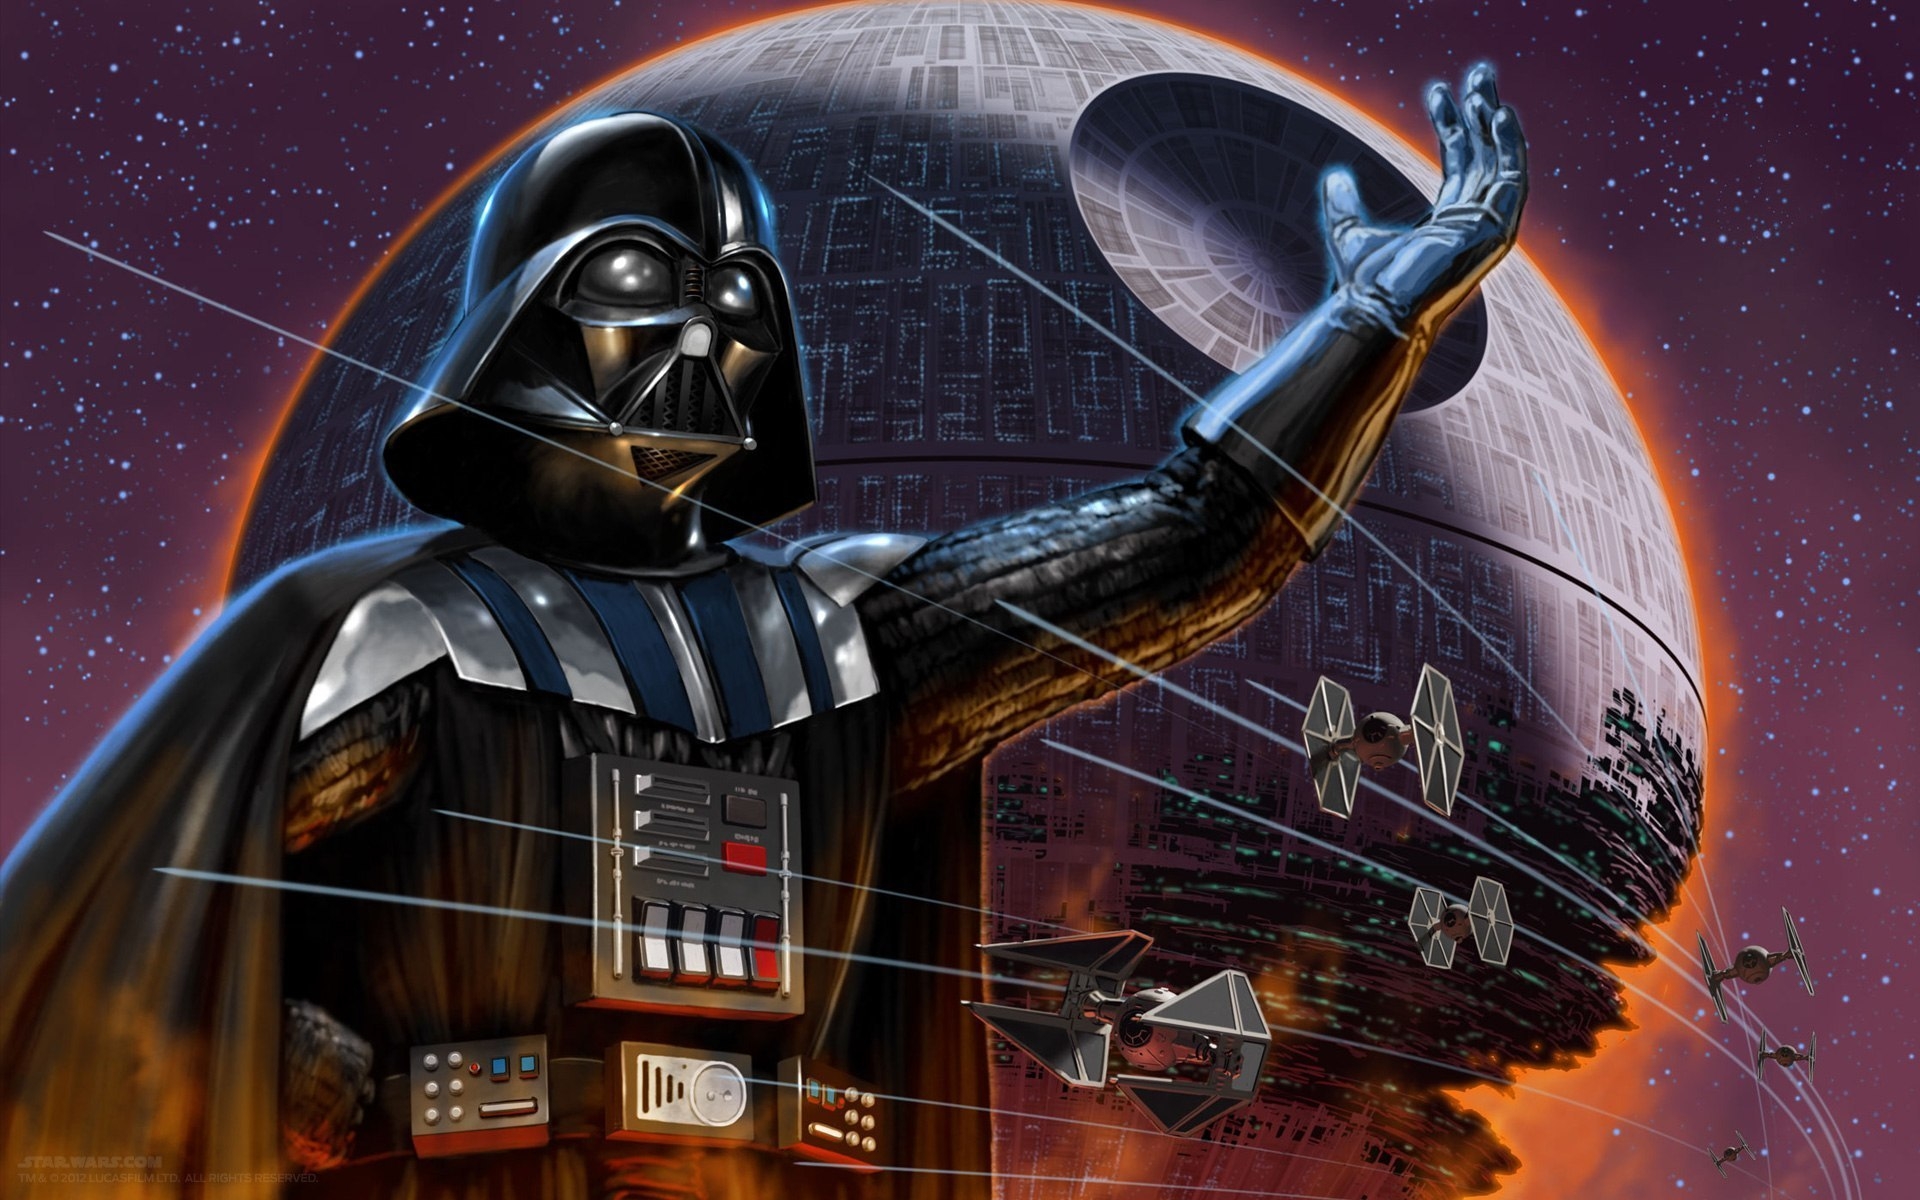 Darth Vader Star Wars Character for 1920 x 1200 widescreen resolution